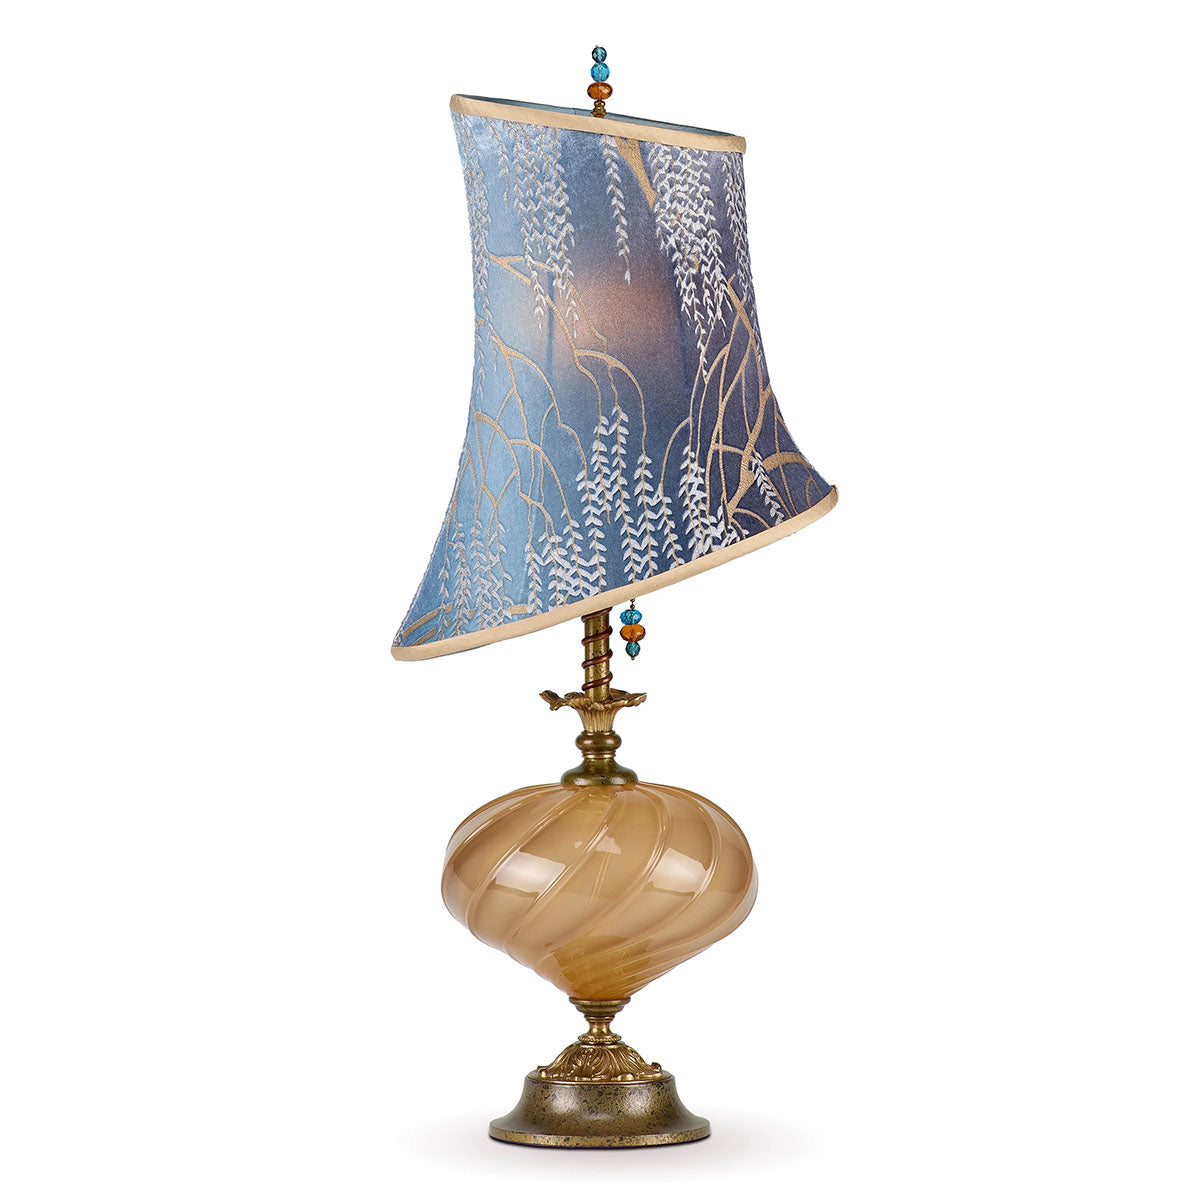 mixed media table lamp blown glass copper willow pattern shade on blue velvet